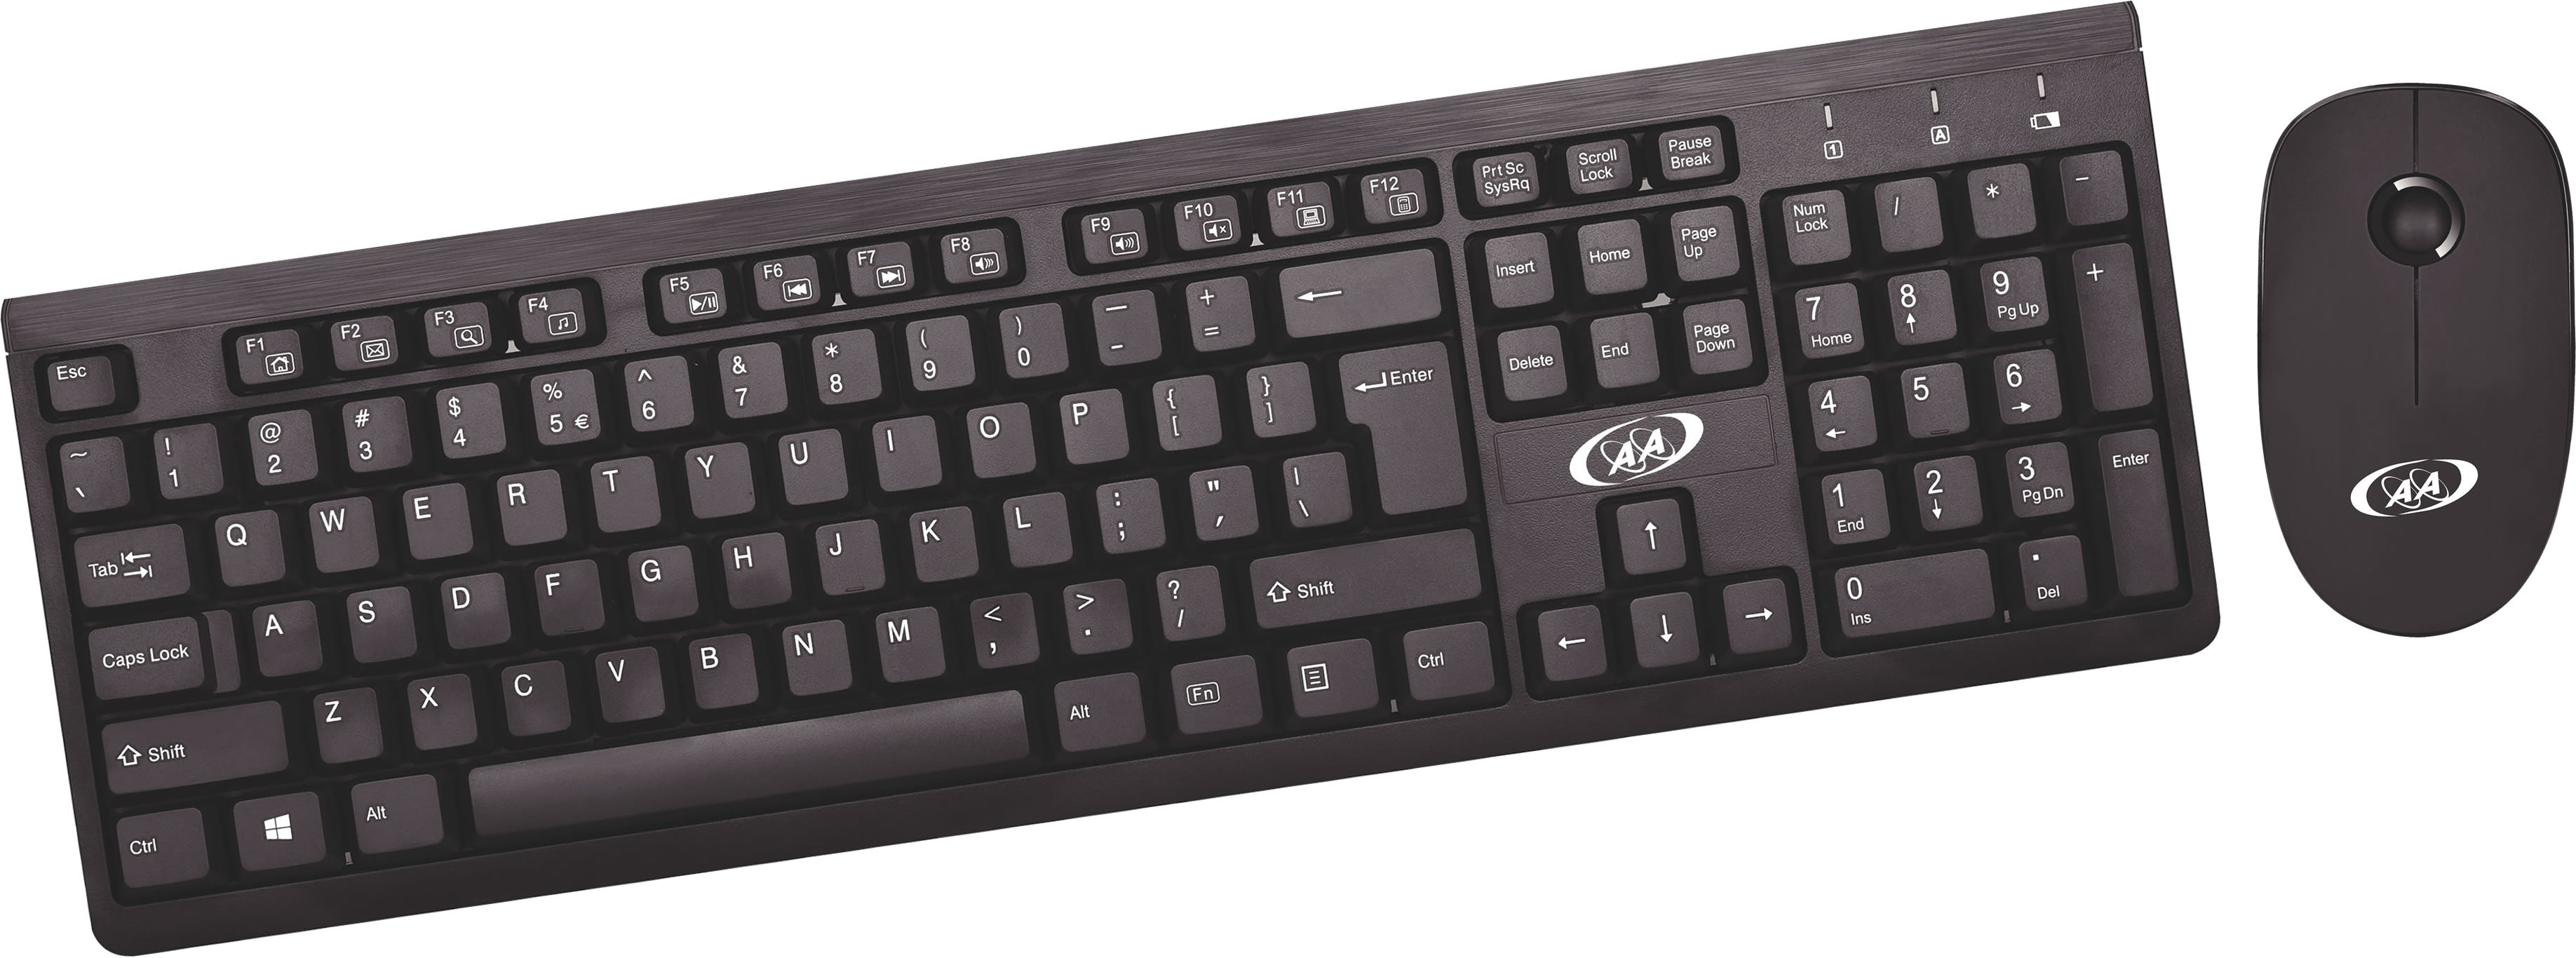 05-0522K Wireless Keyboard and Mouse Kit